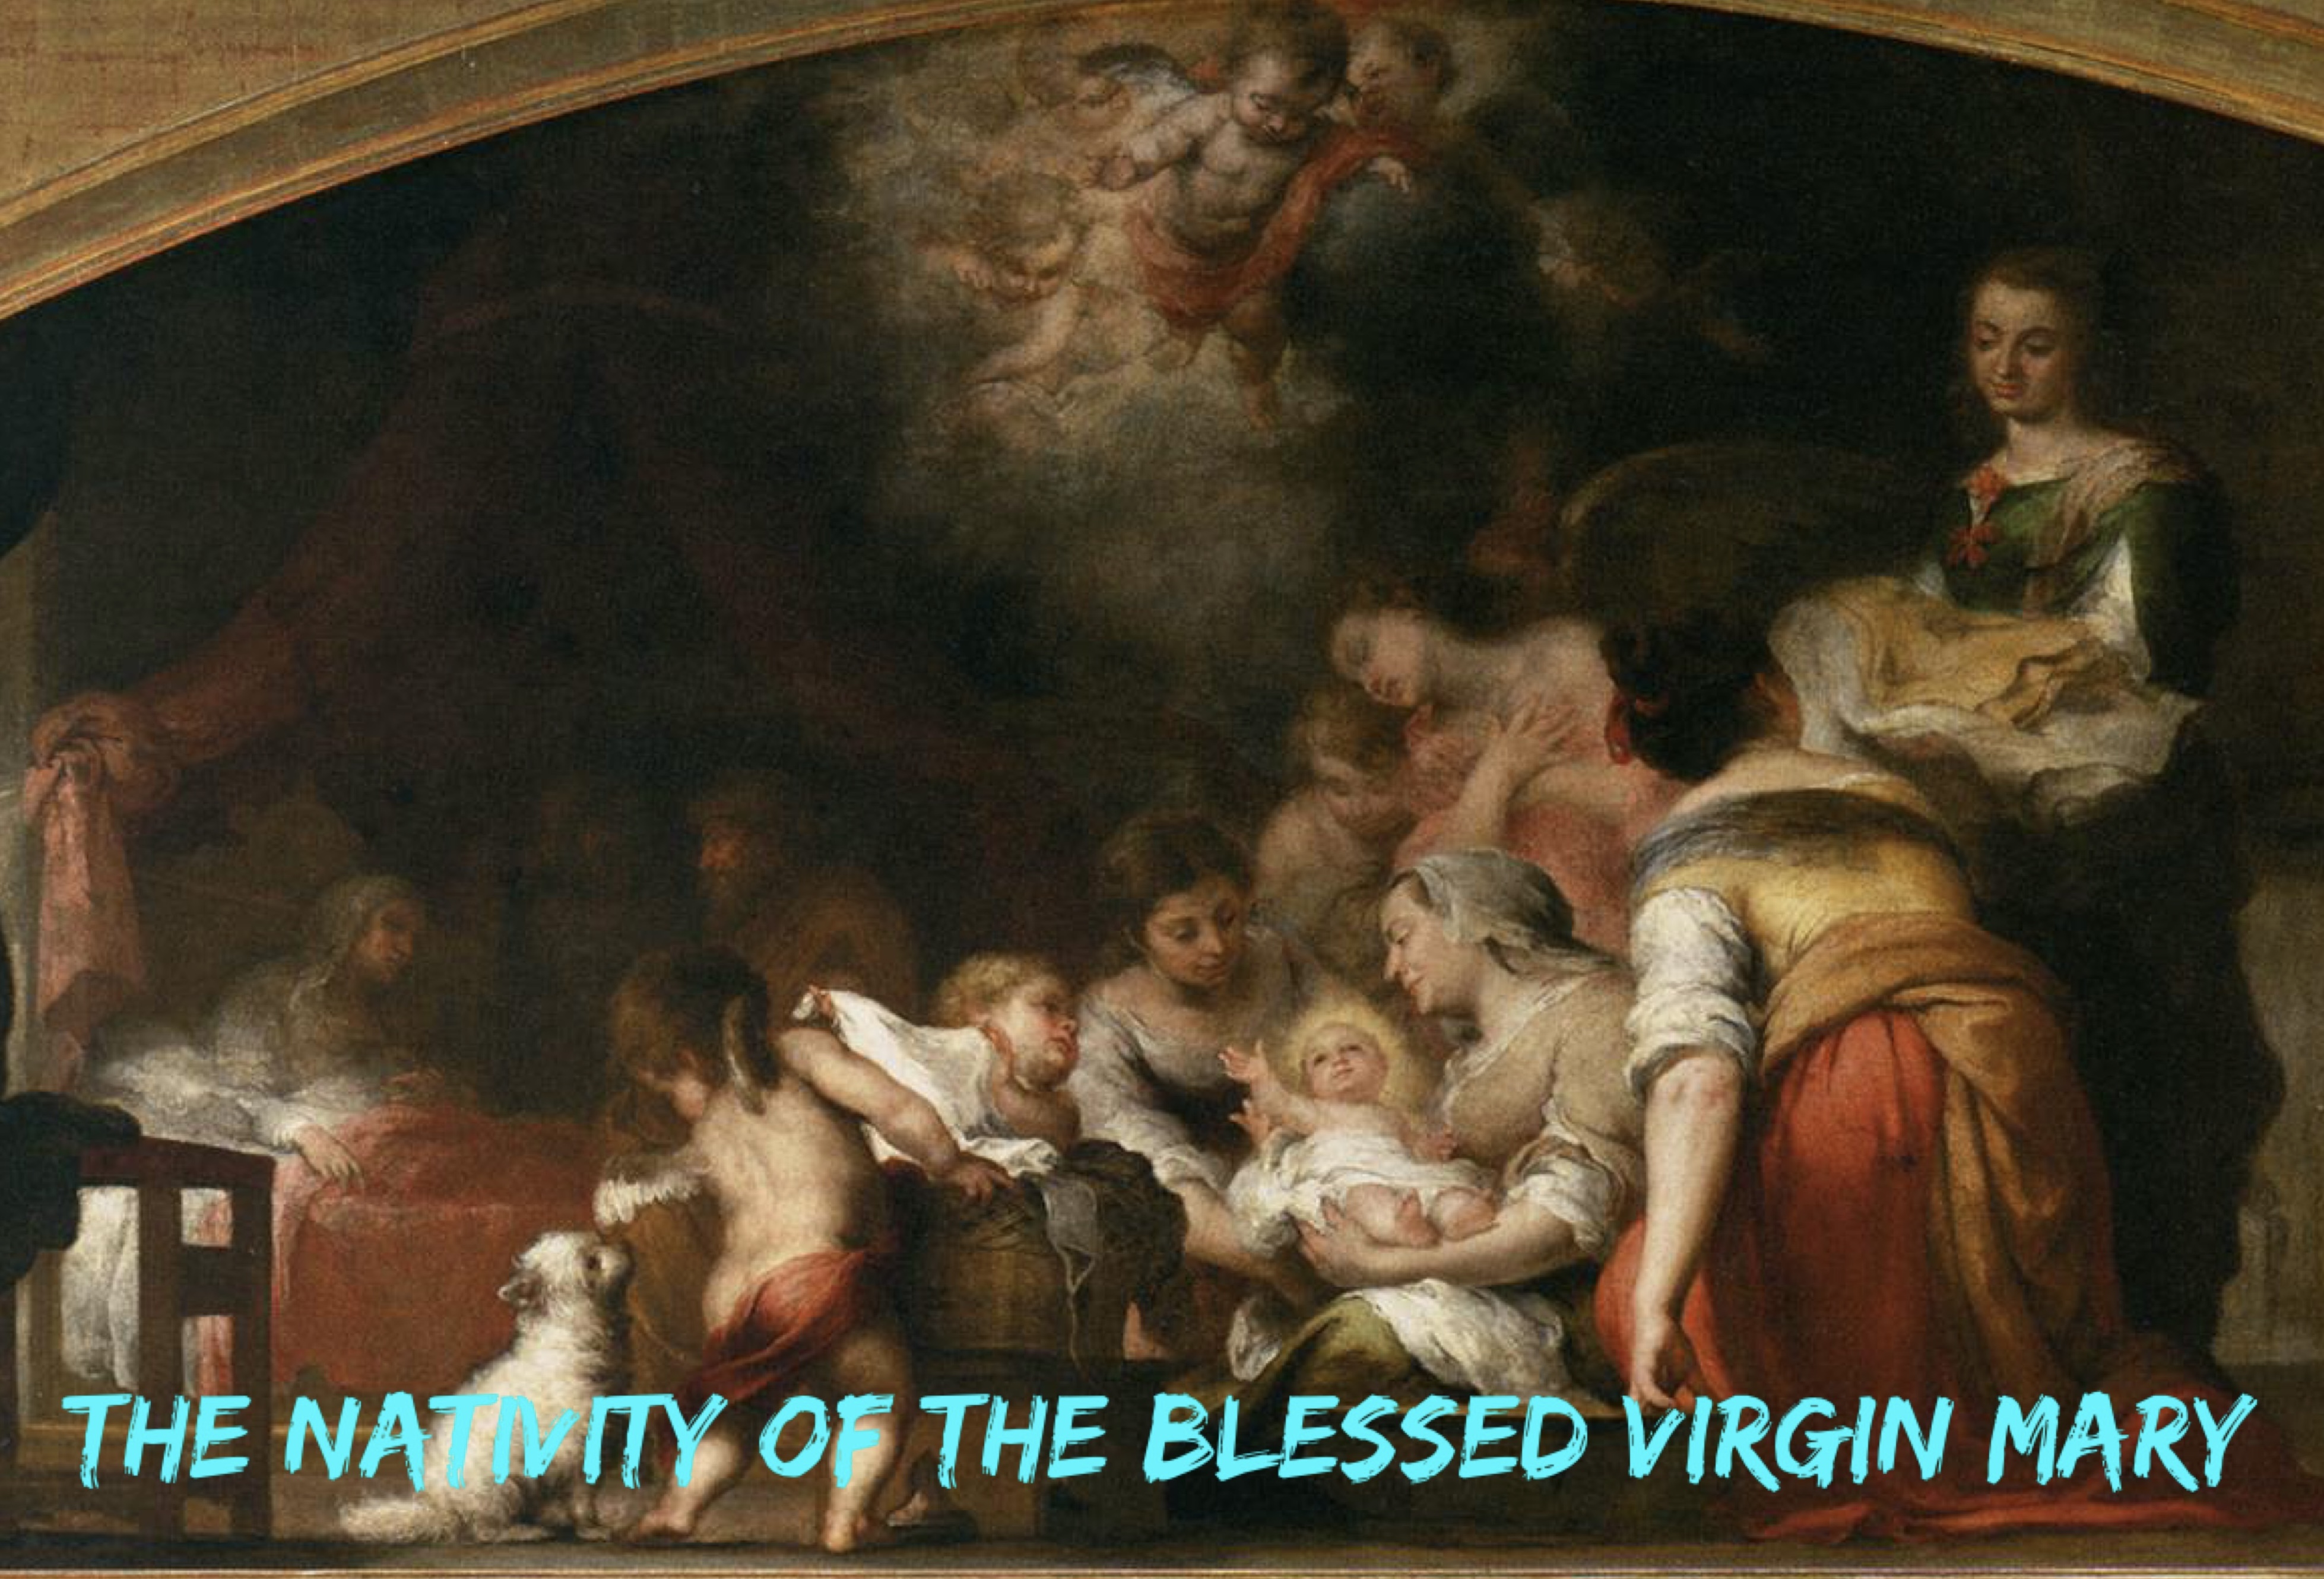 8th September - The Nativity of the Blessed Virgin Mary